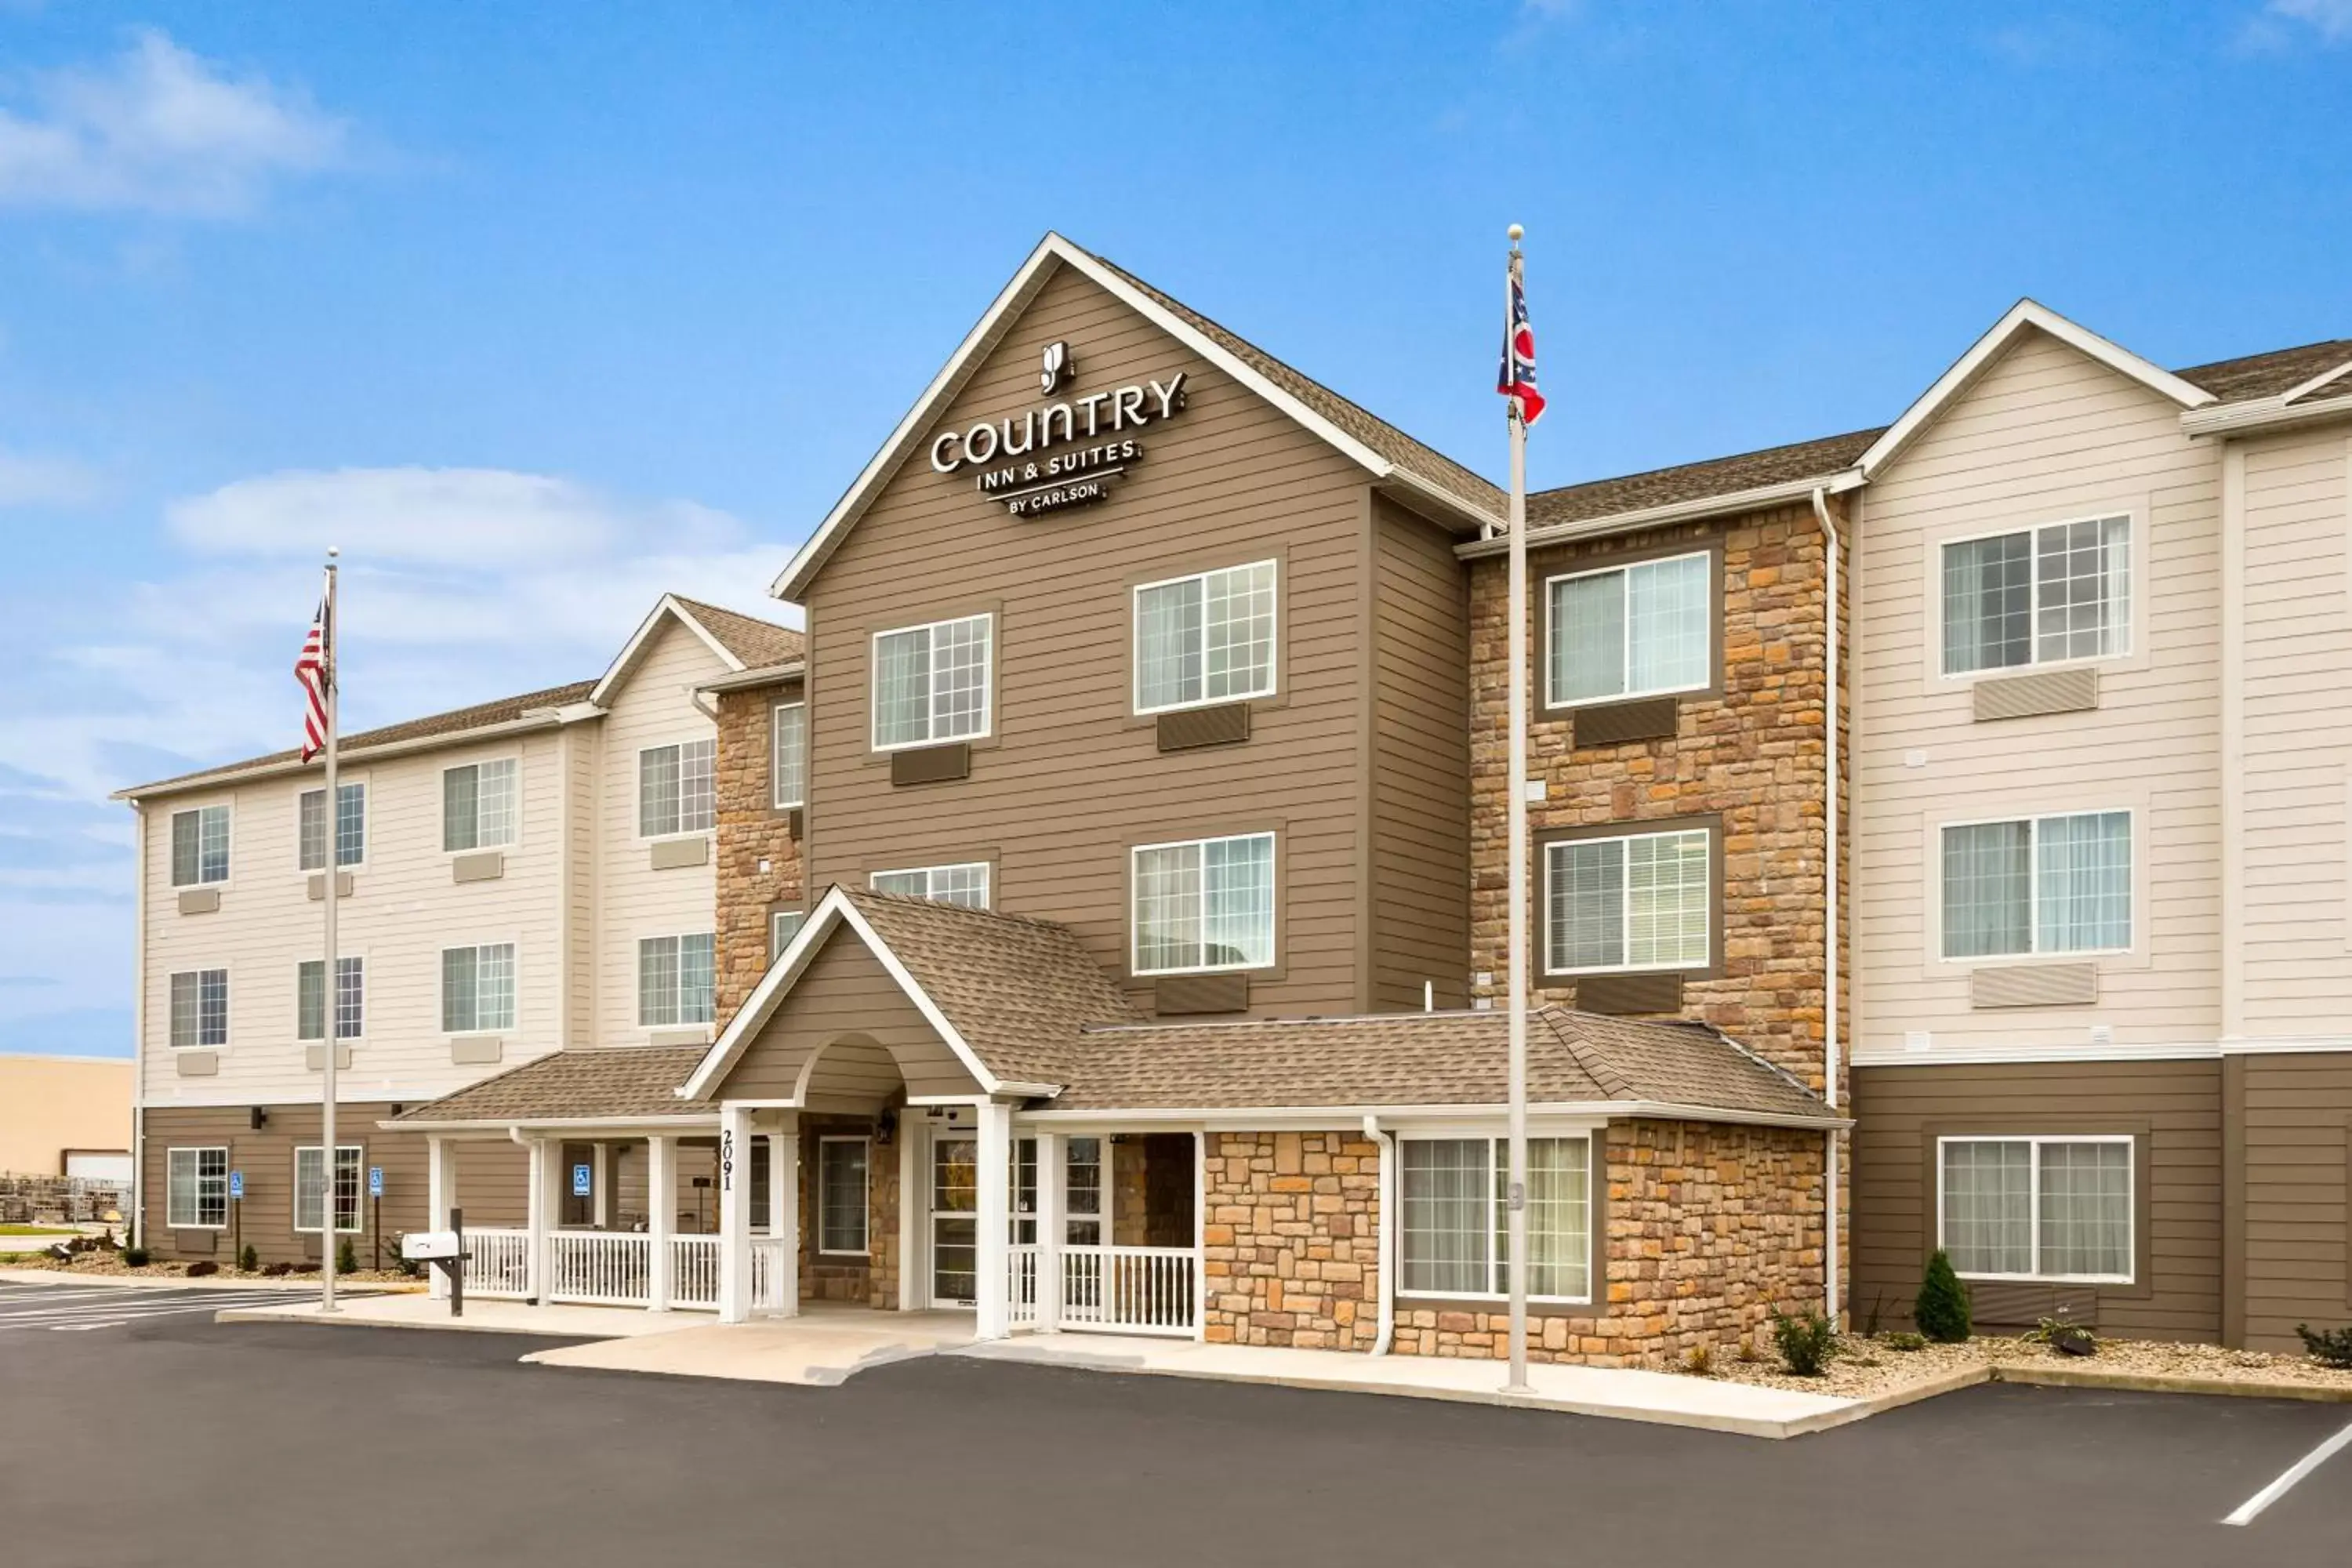 Property Building in Country Inn & Suites by Radisson, Marion, OH